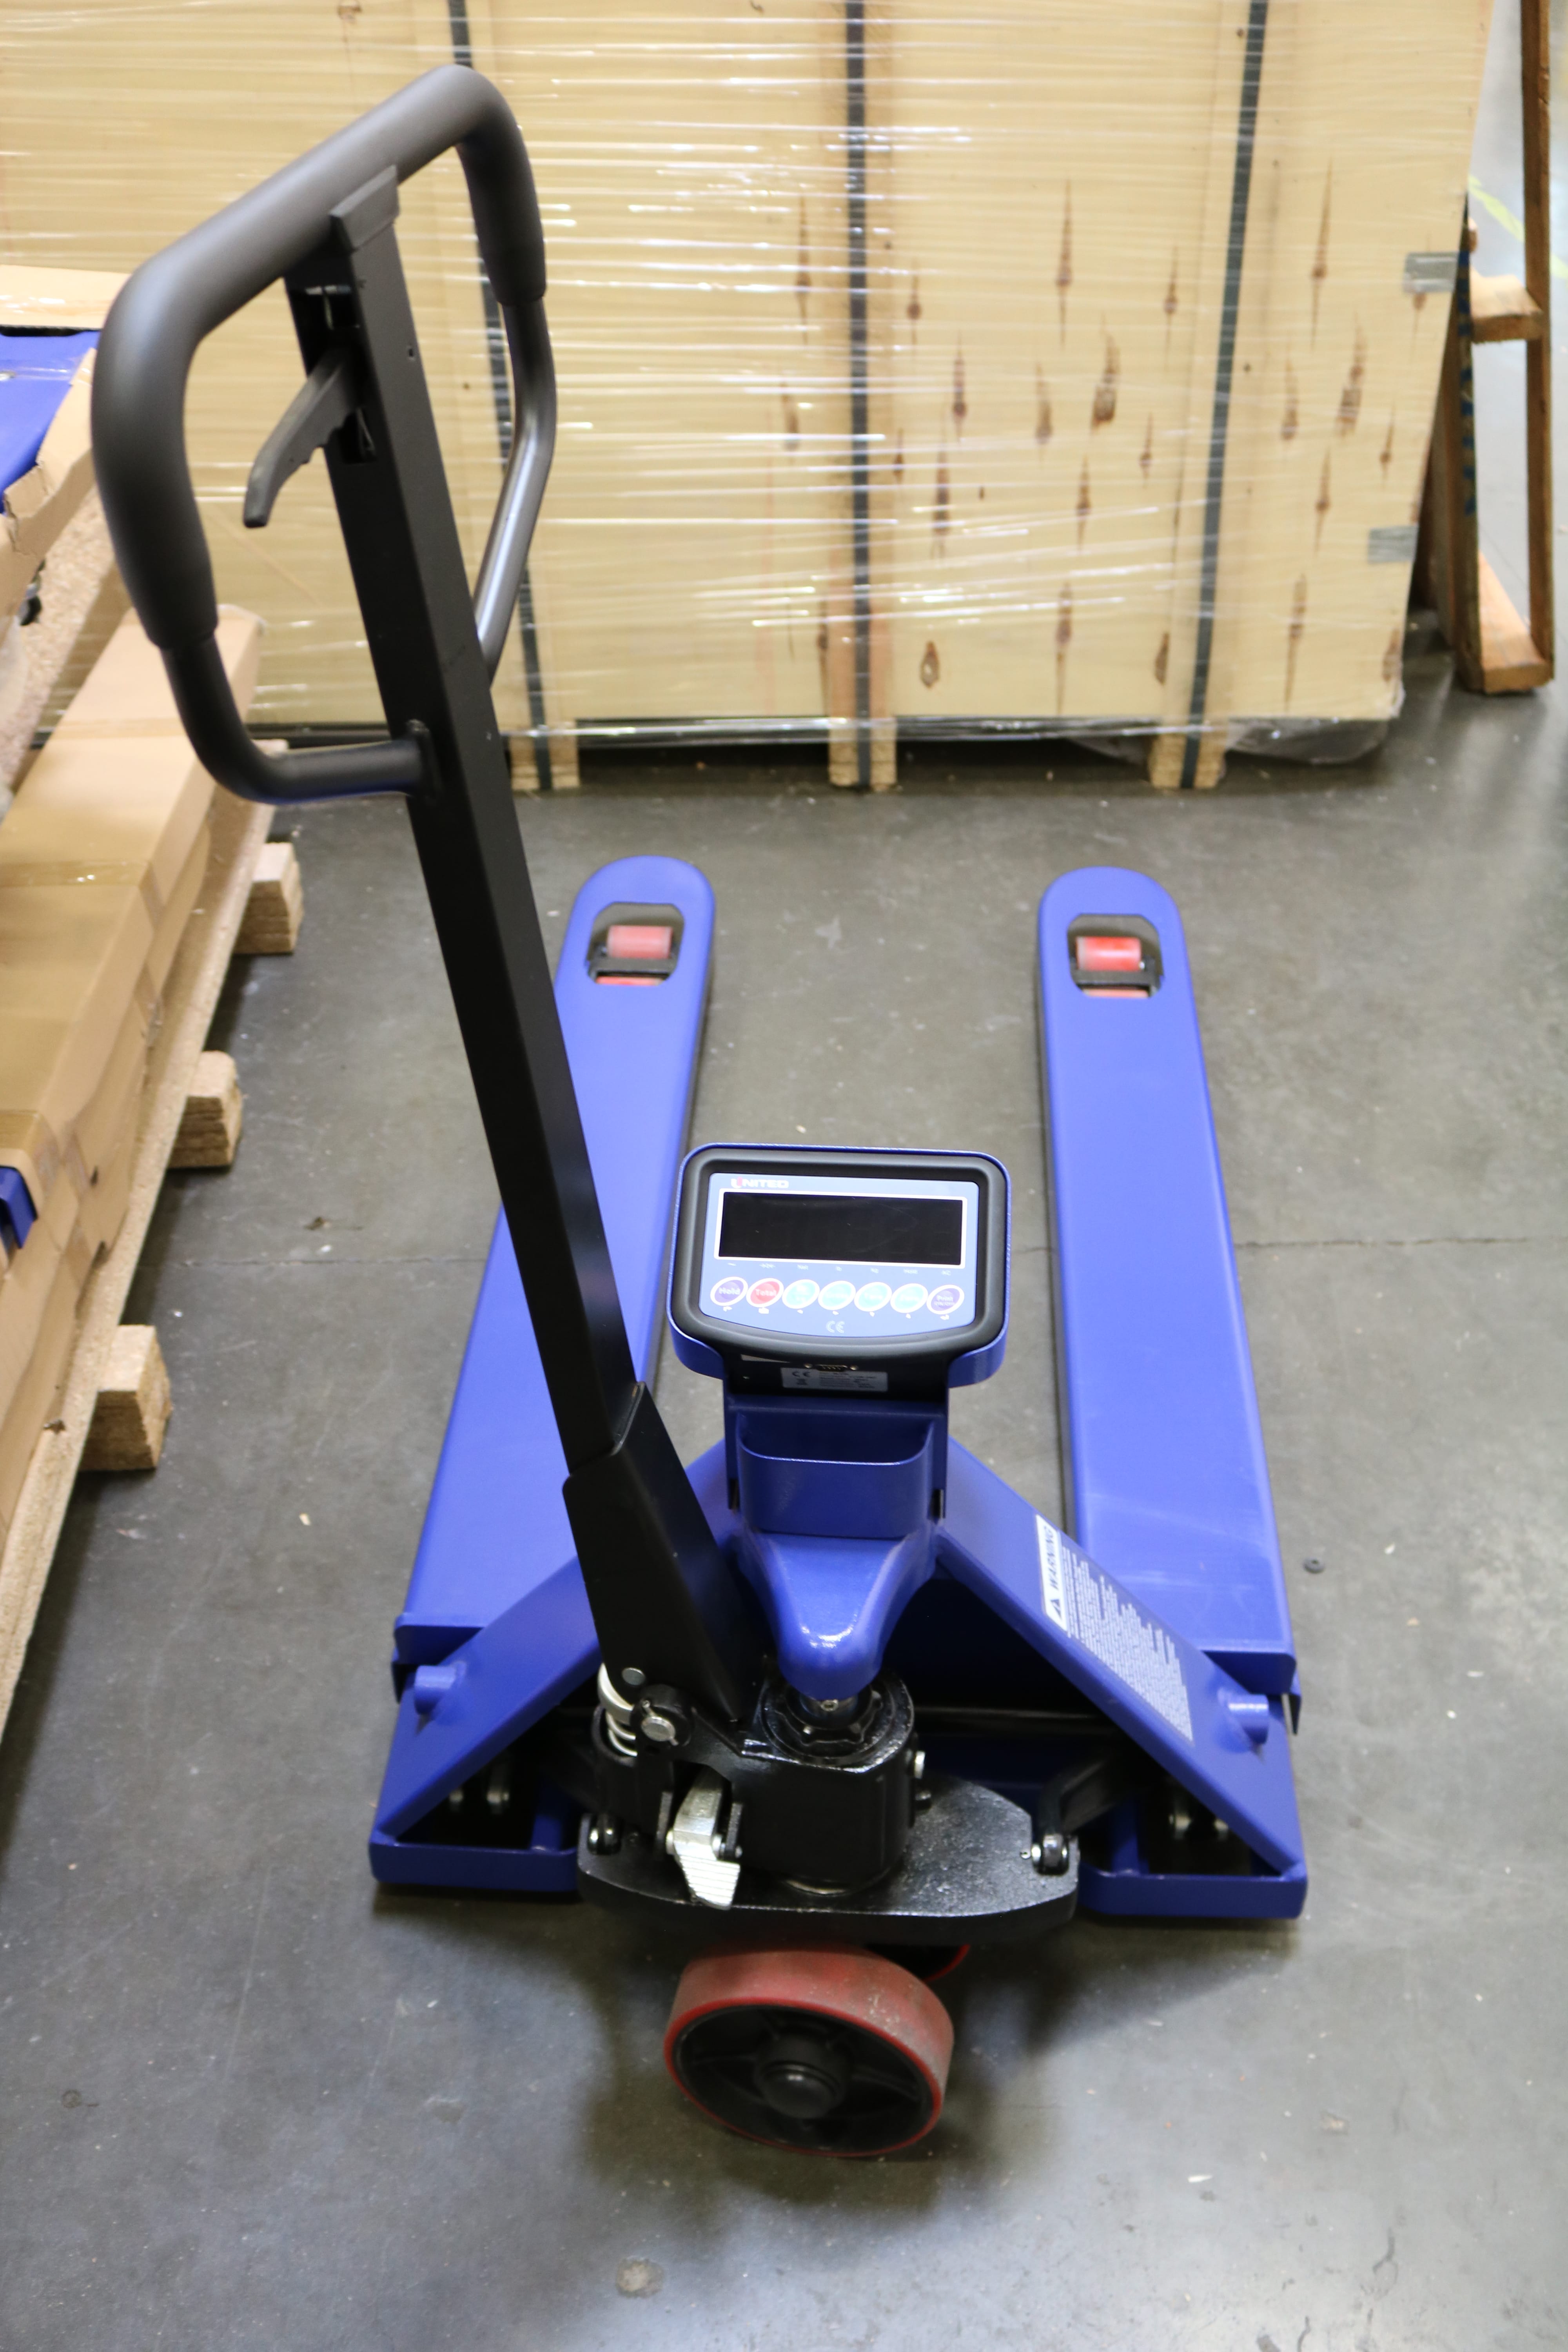 pallet jacks with scales